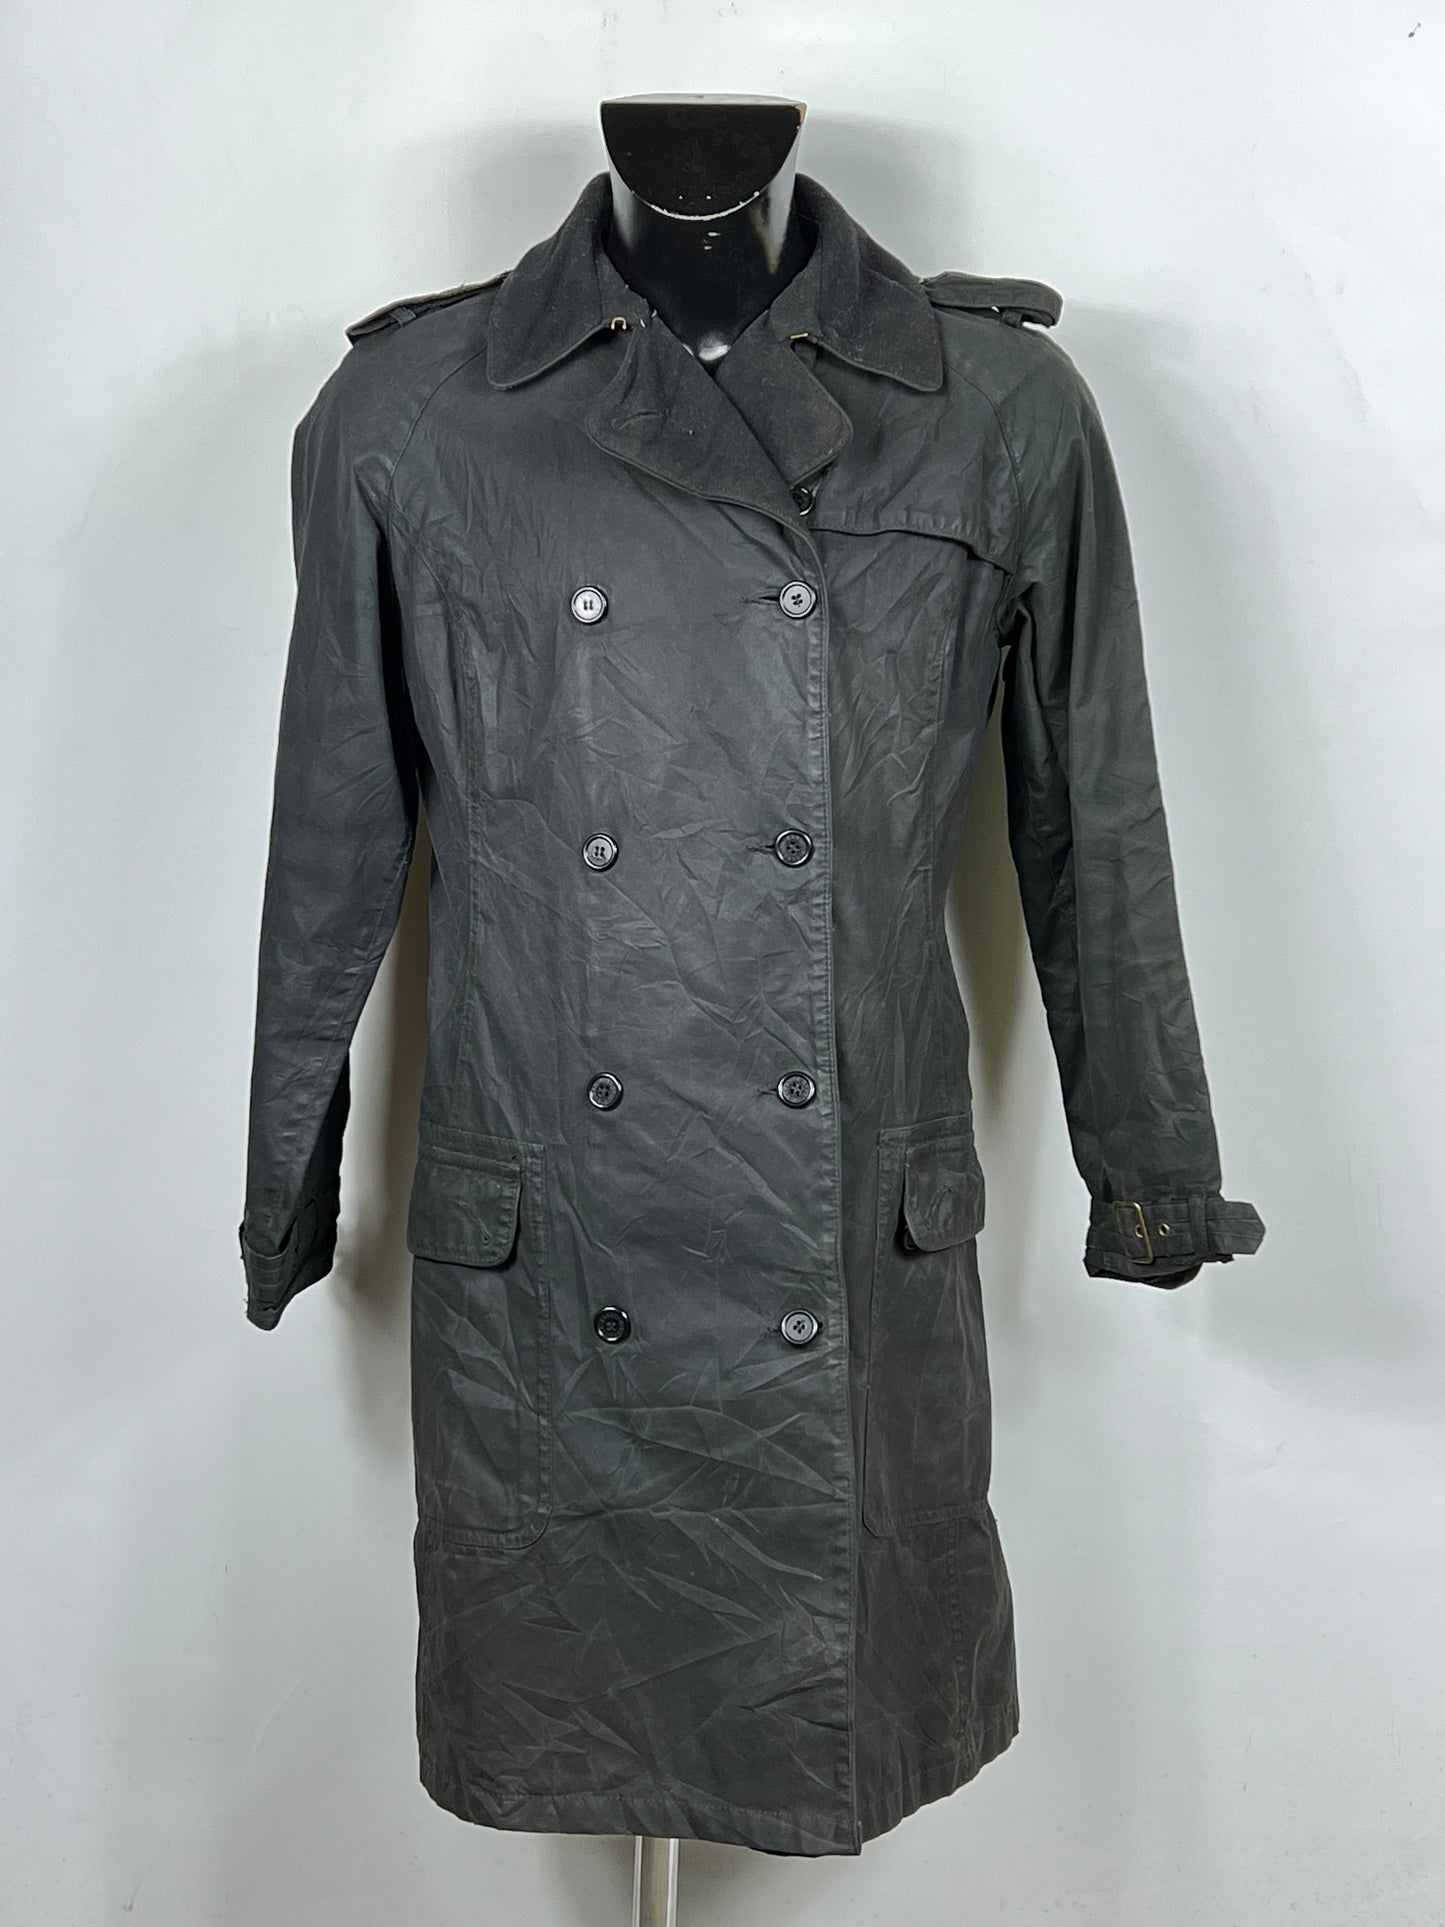 Giacca Barbour nero donna modello Valerie Trench Medium Black wax lady trench uk14